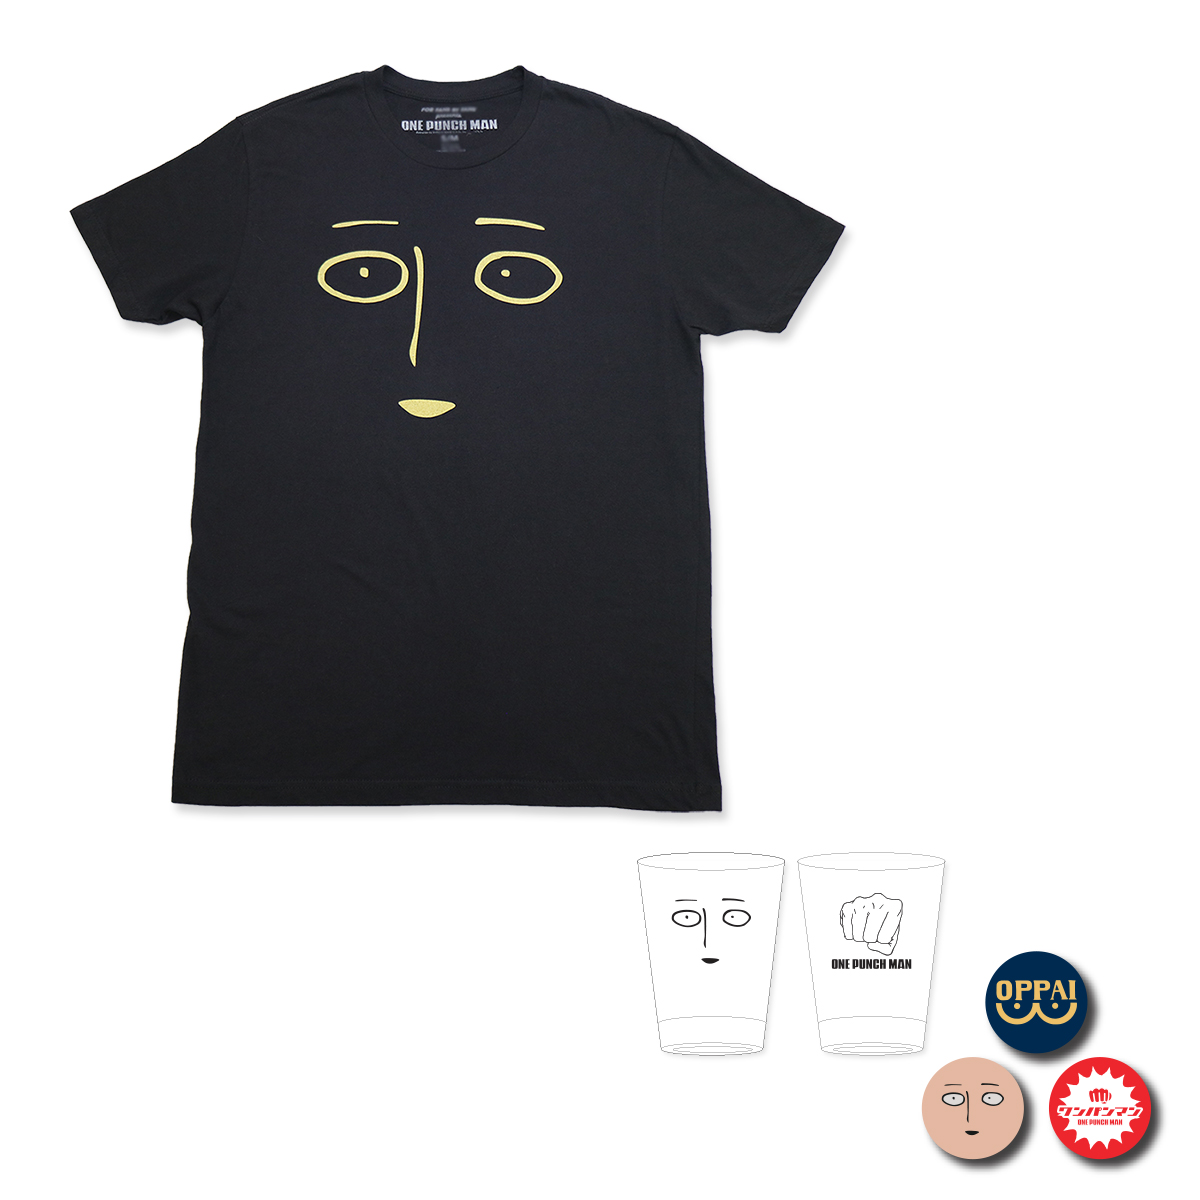 One-Punch Man Face T-Shirt Bundle [July 2021 Delivery]